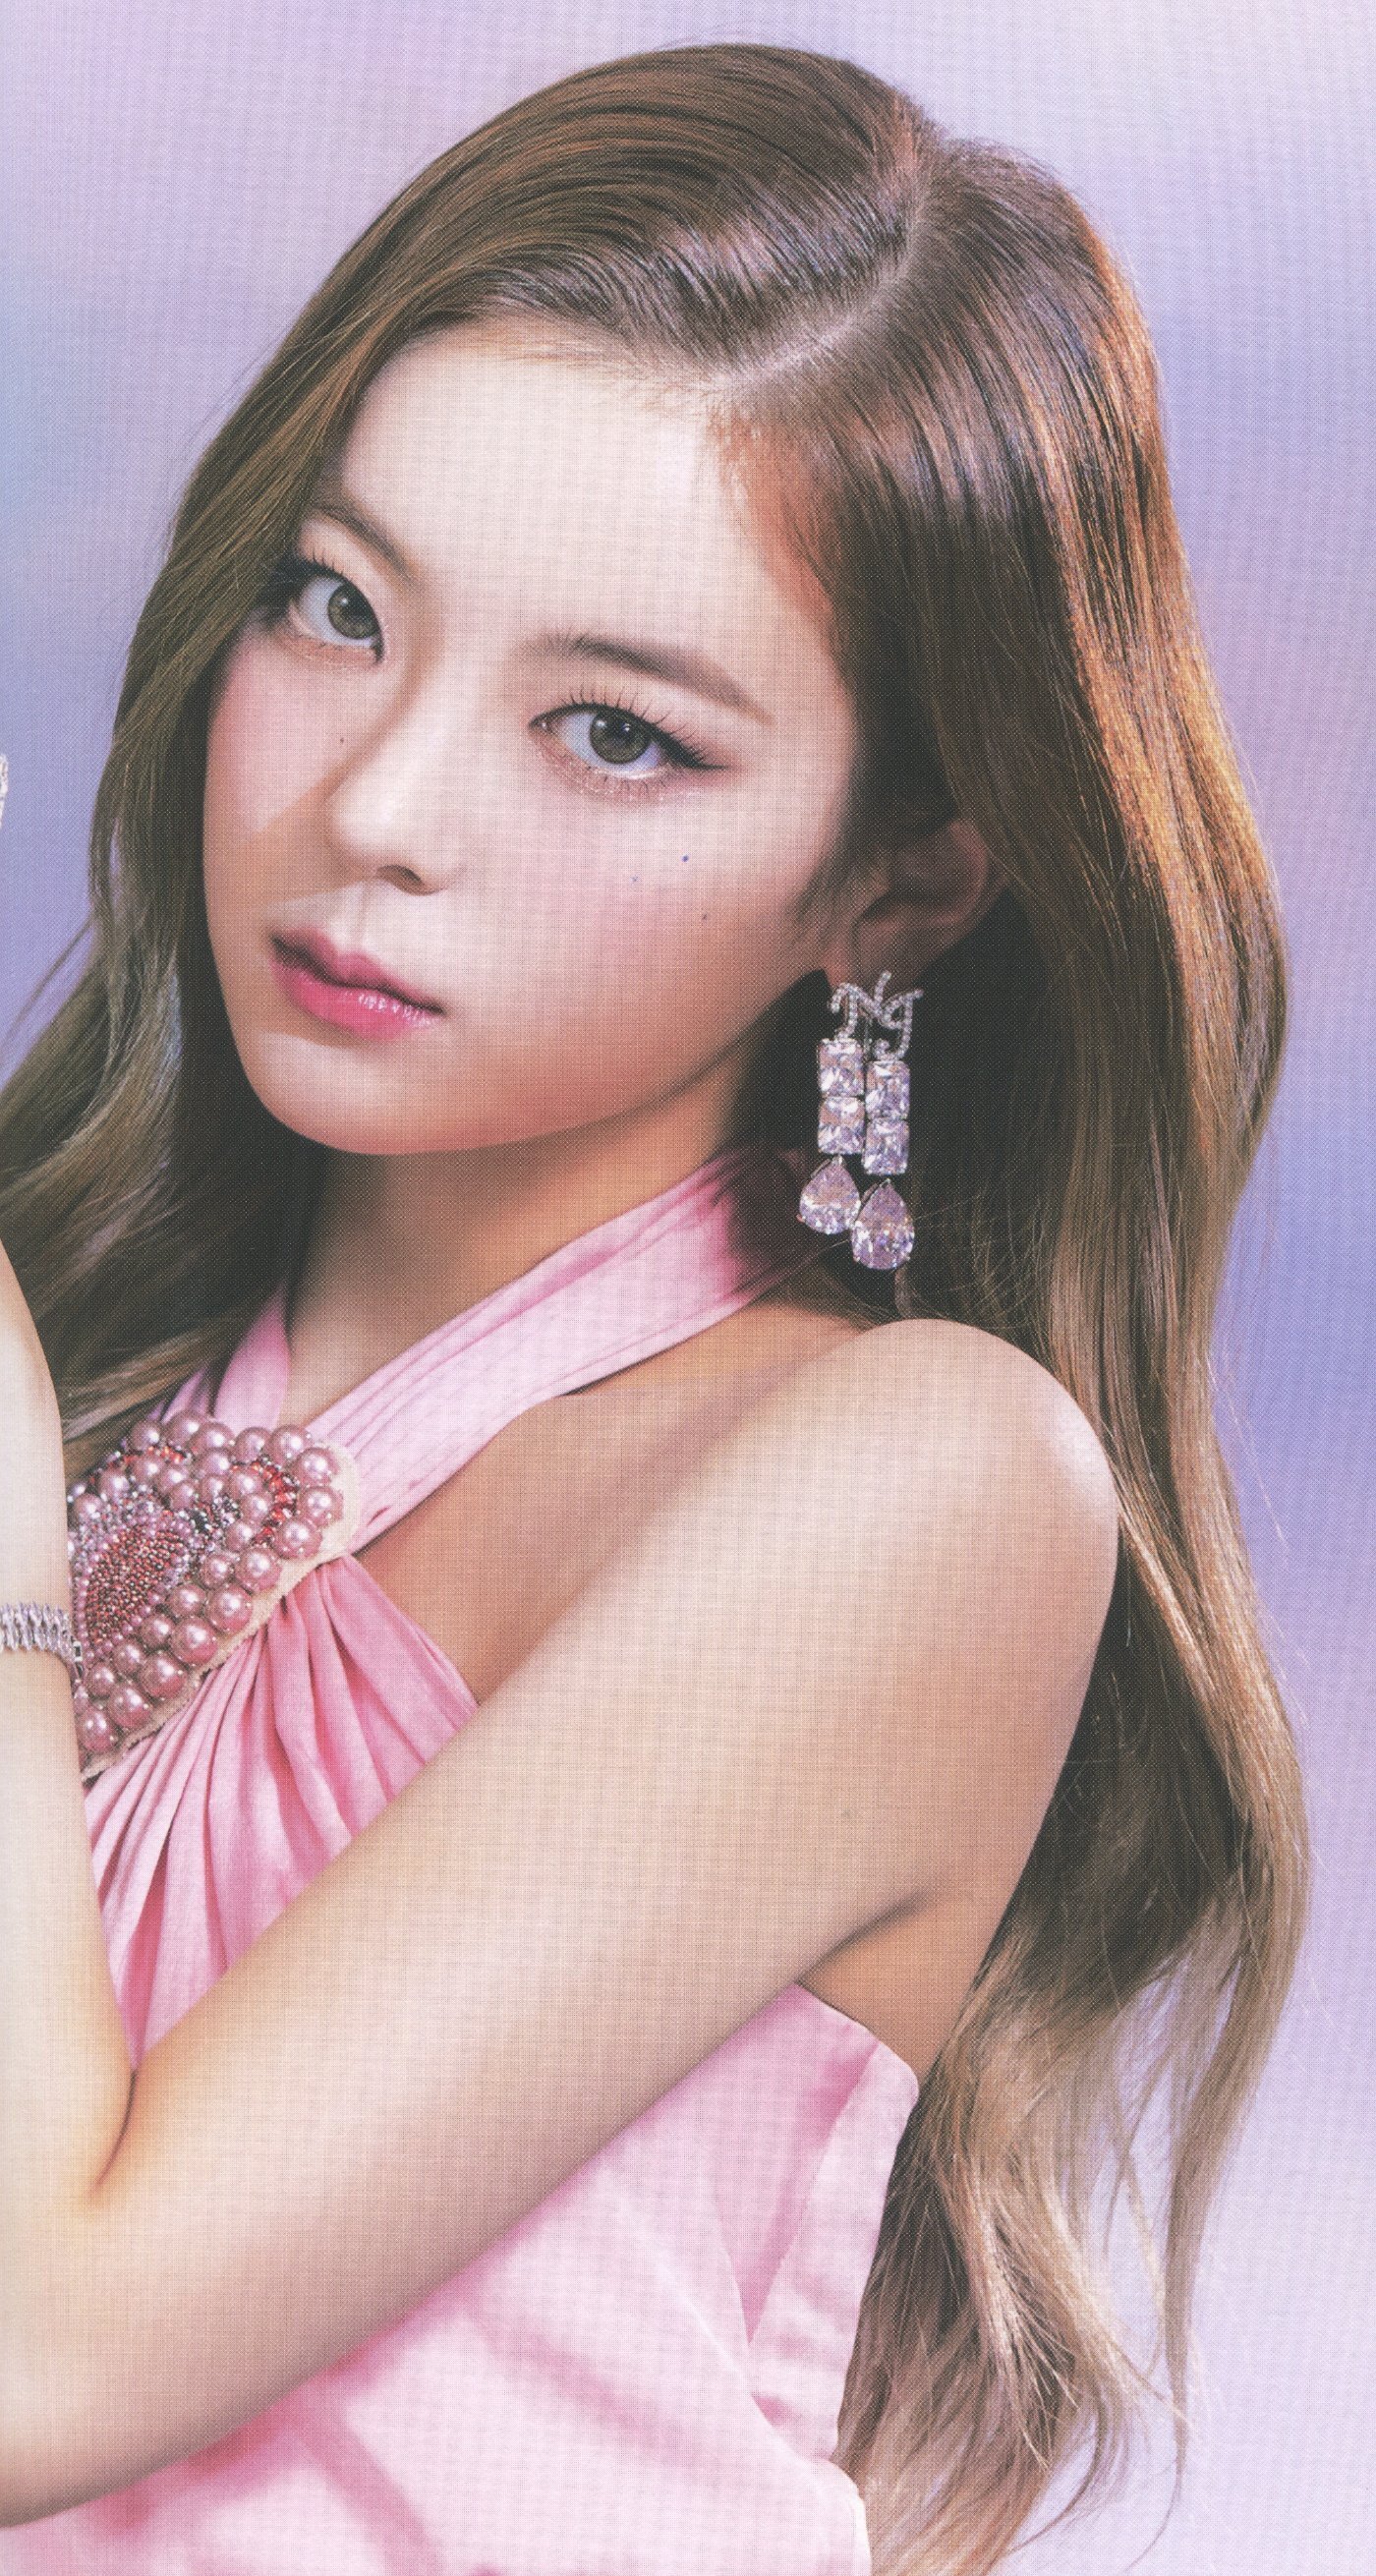 ITZY 'CHECKMATE' Album Scans (Lia ver.) | kpopping